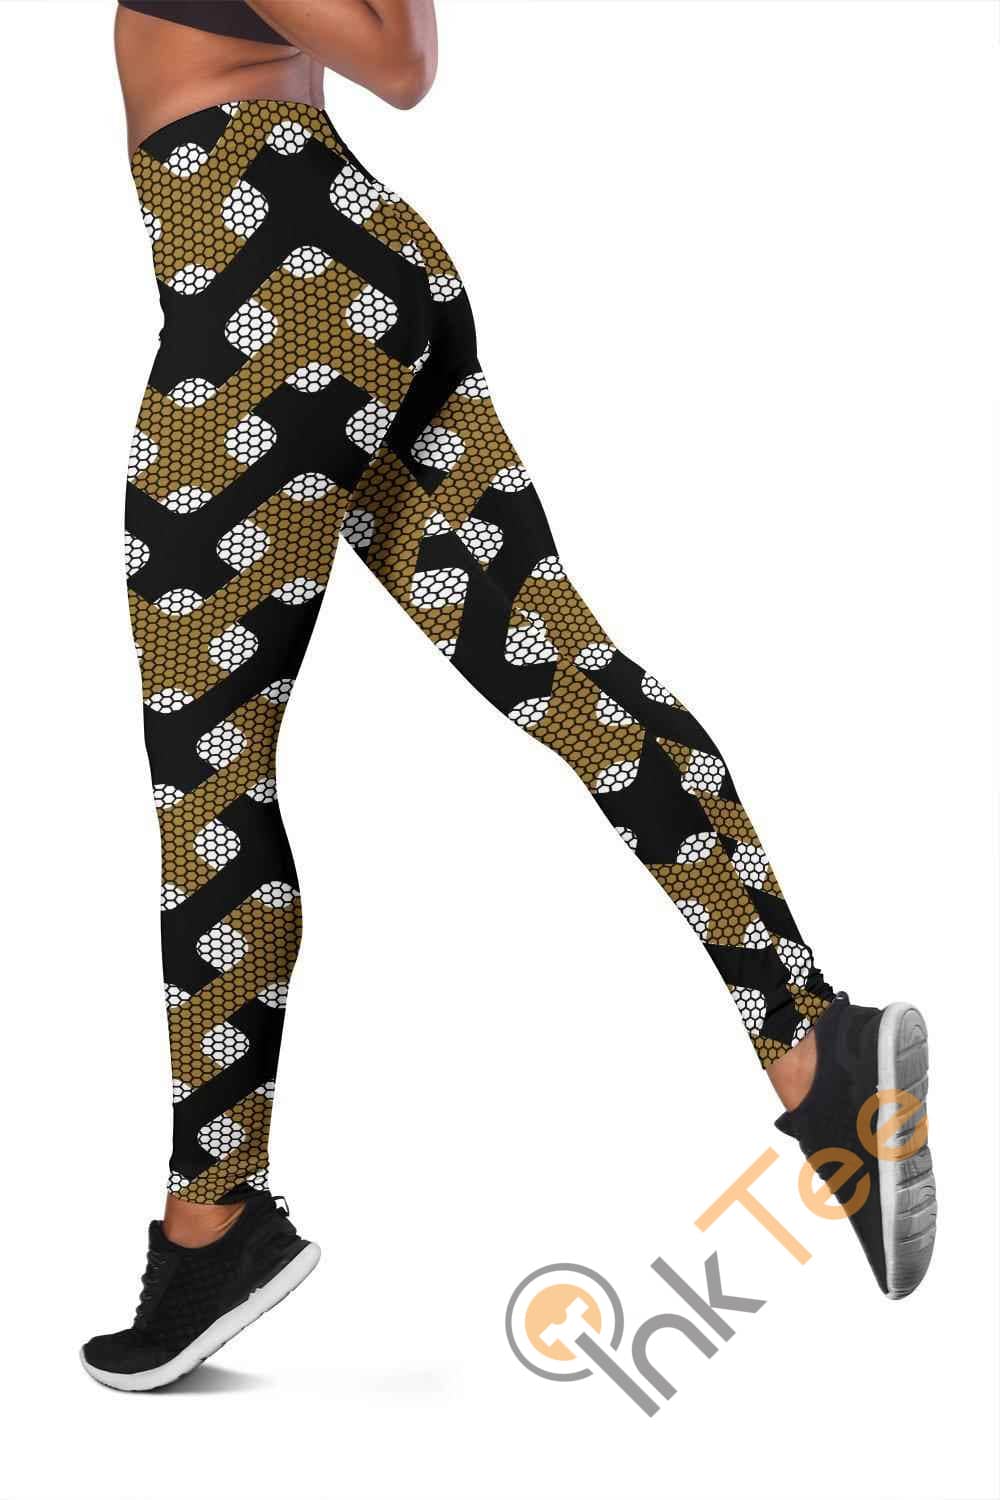 Inktee Store - Wake Forest Deamon Deacons Inspired Liberty 3D All Over Print For Yoga Fitness Fashion Women'S Leggings Image